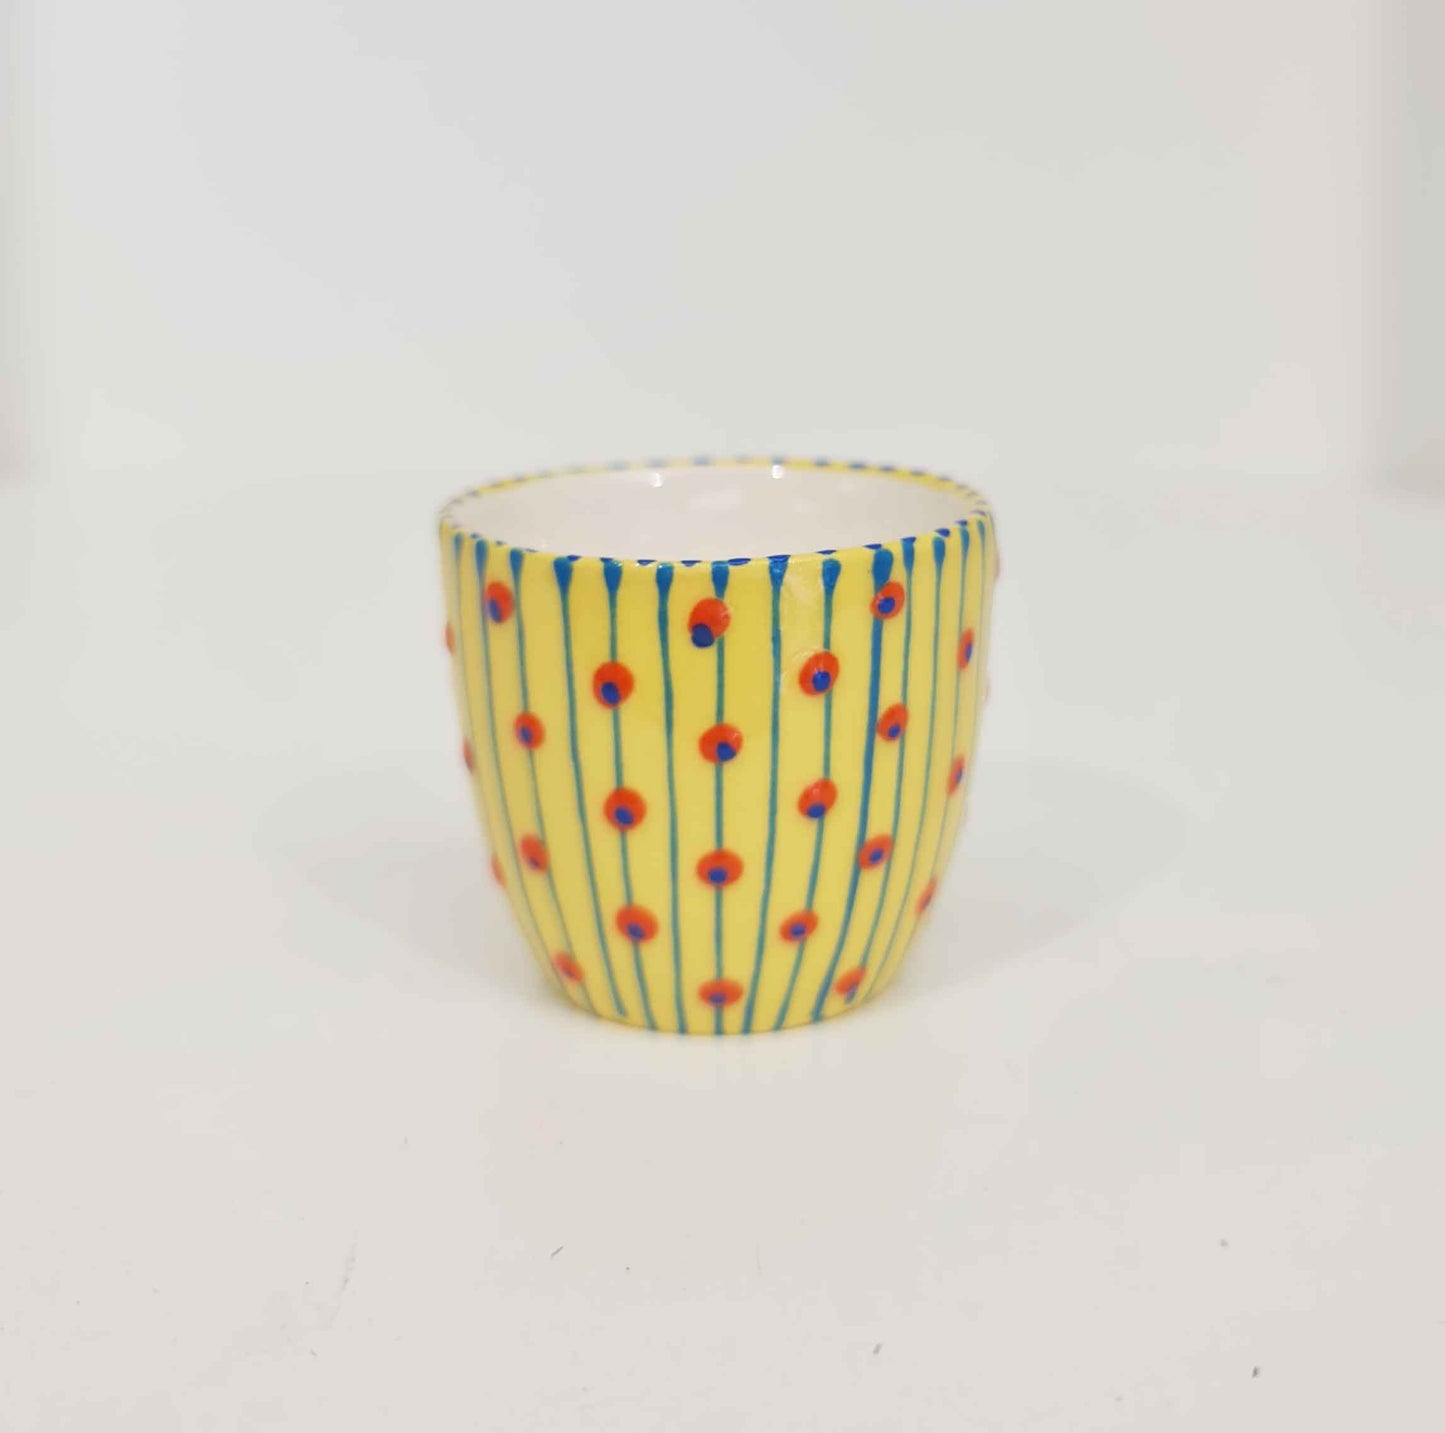 Hand Painted Egg Cup Blue